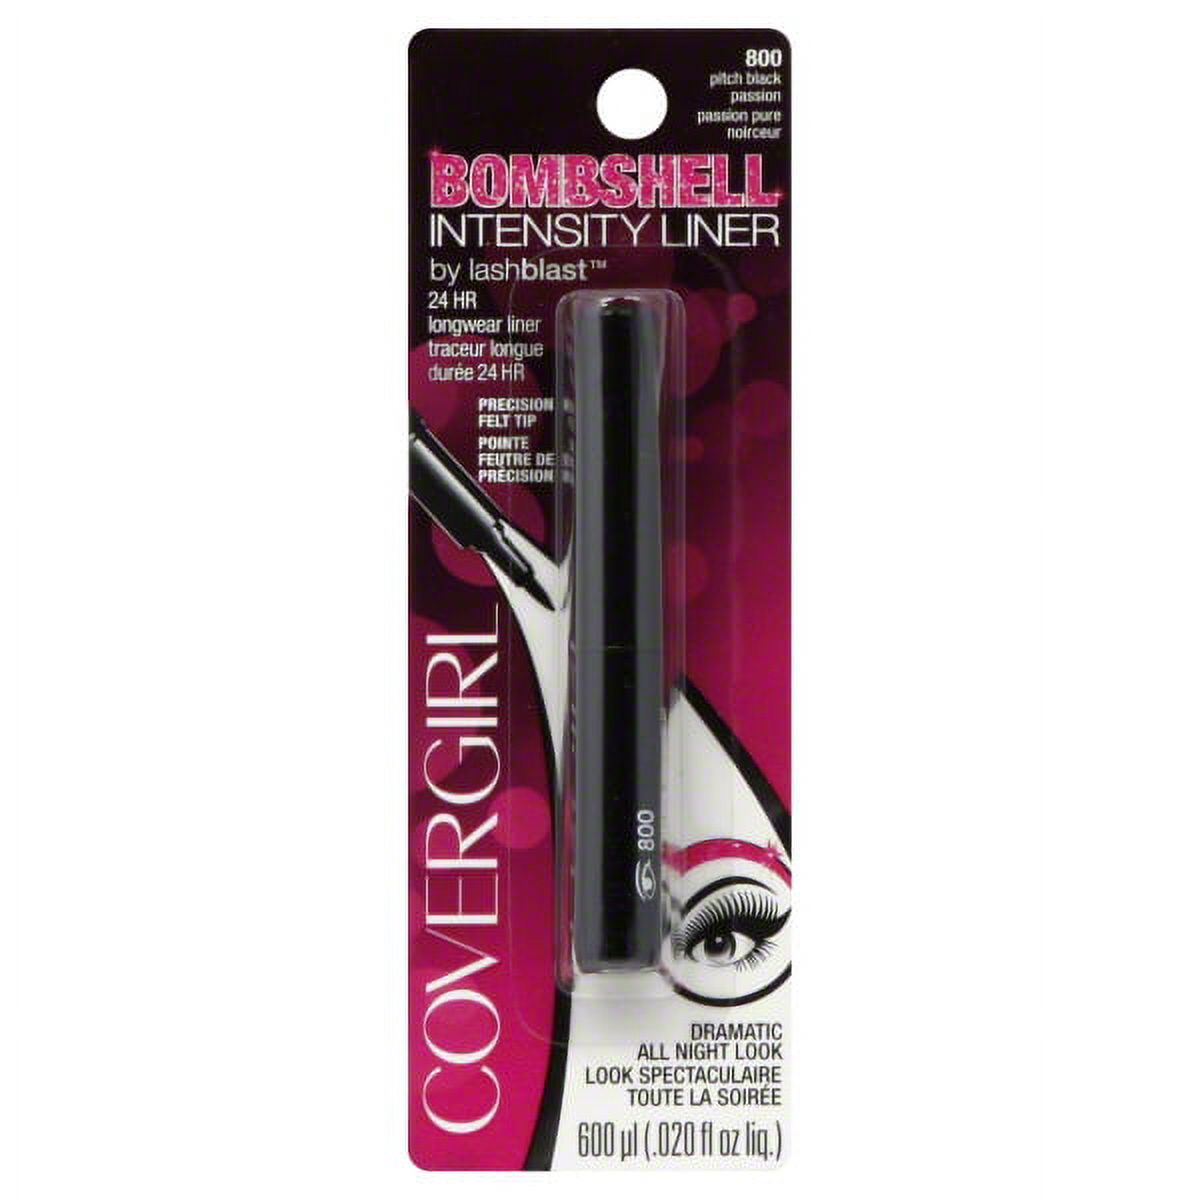 COVERGIRL Bombshell Intensity Liner, Pitch Black Passion, 800 - image 2 of 2